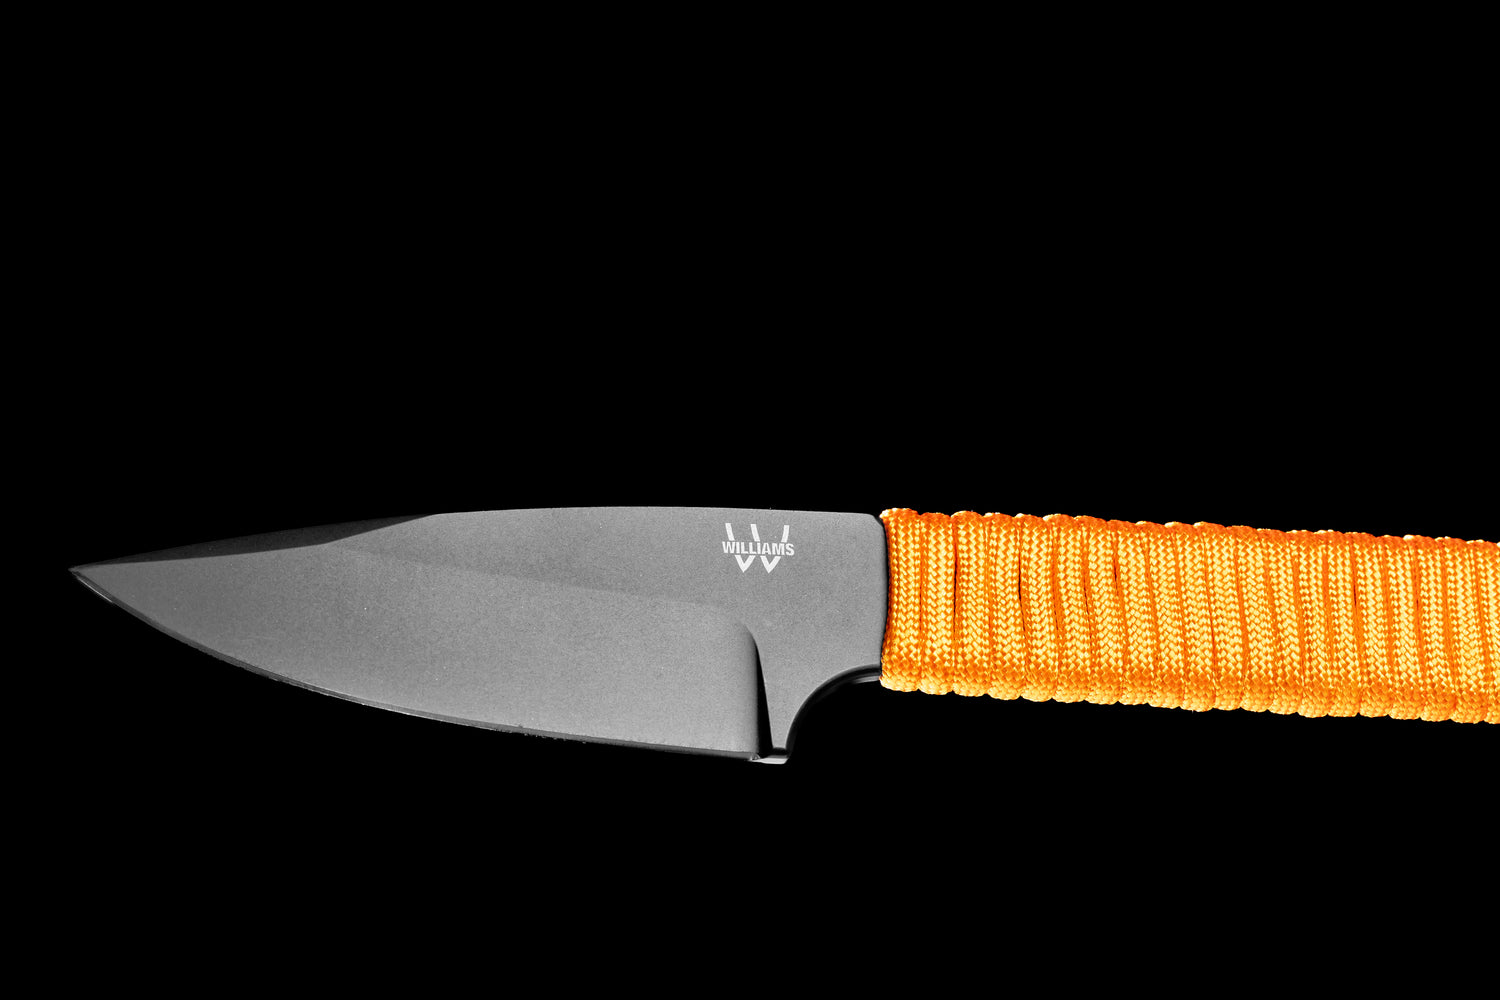 Paracord Knife - Tactical Knife – Williams Knife